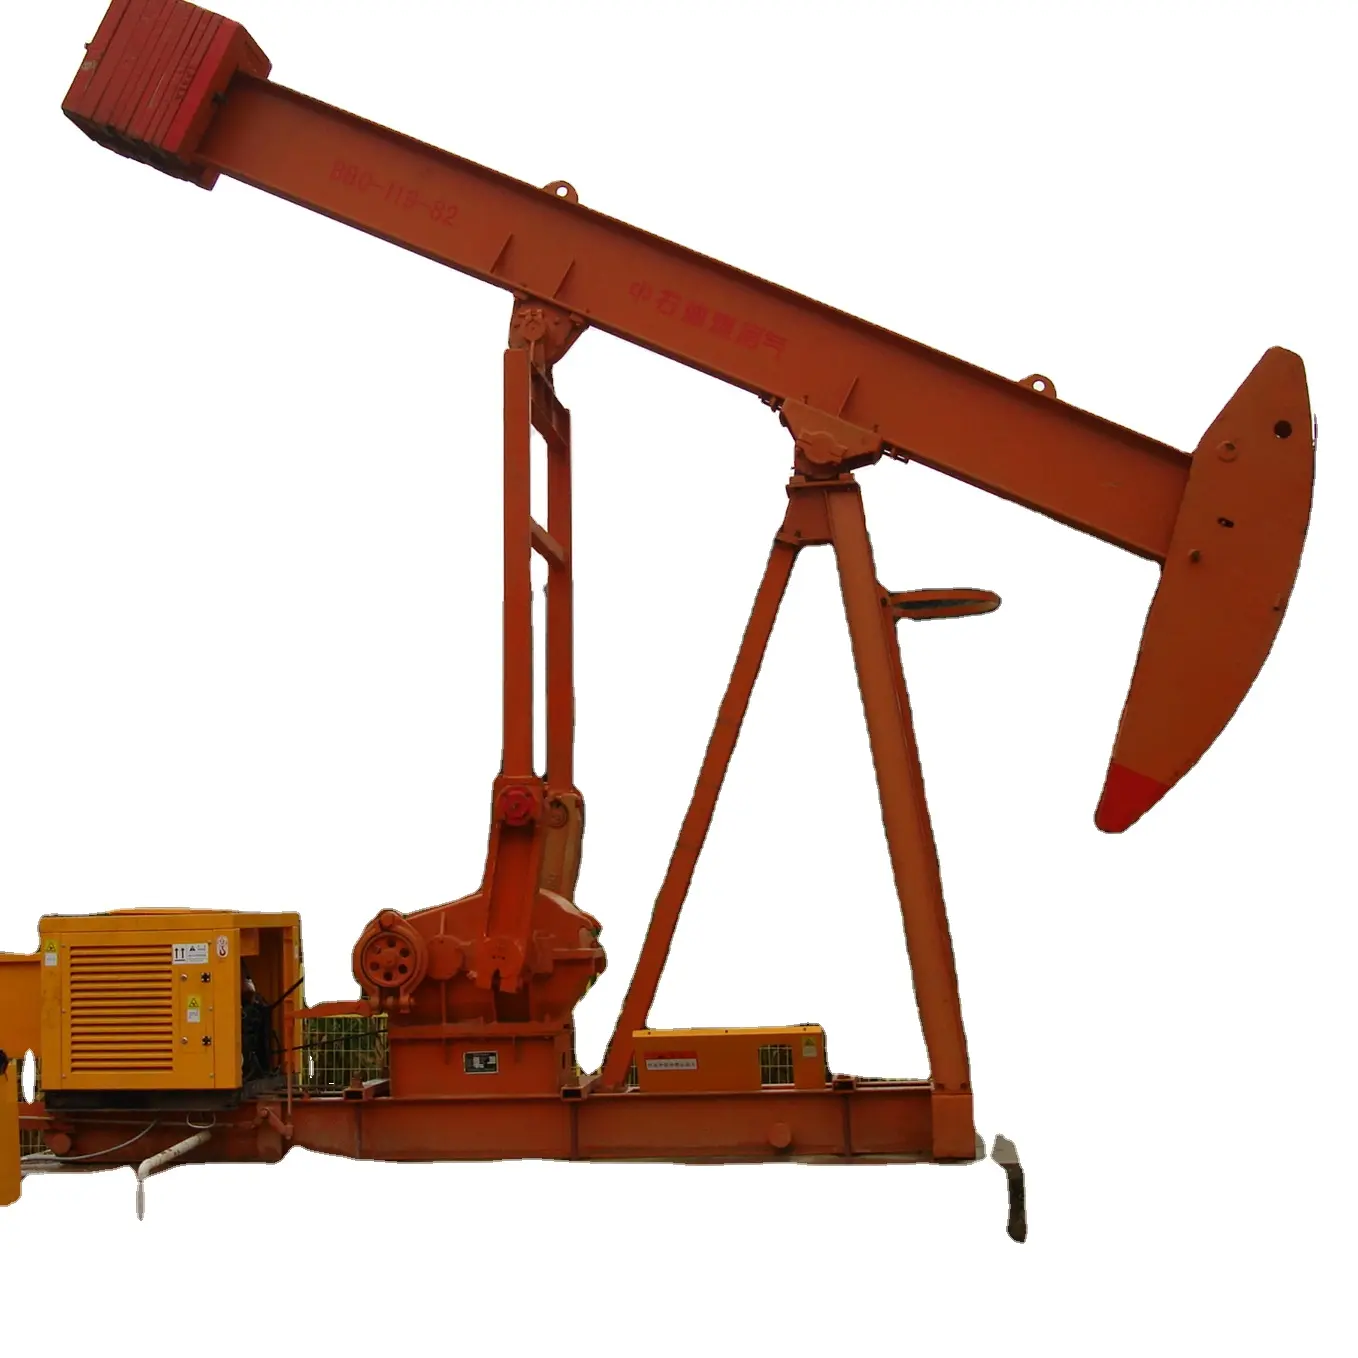 API B series beam balanced pumping units for shallow well in oilfield